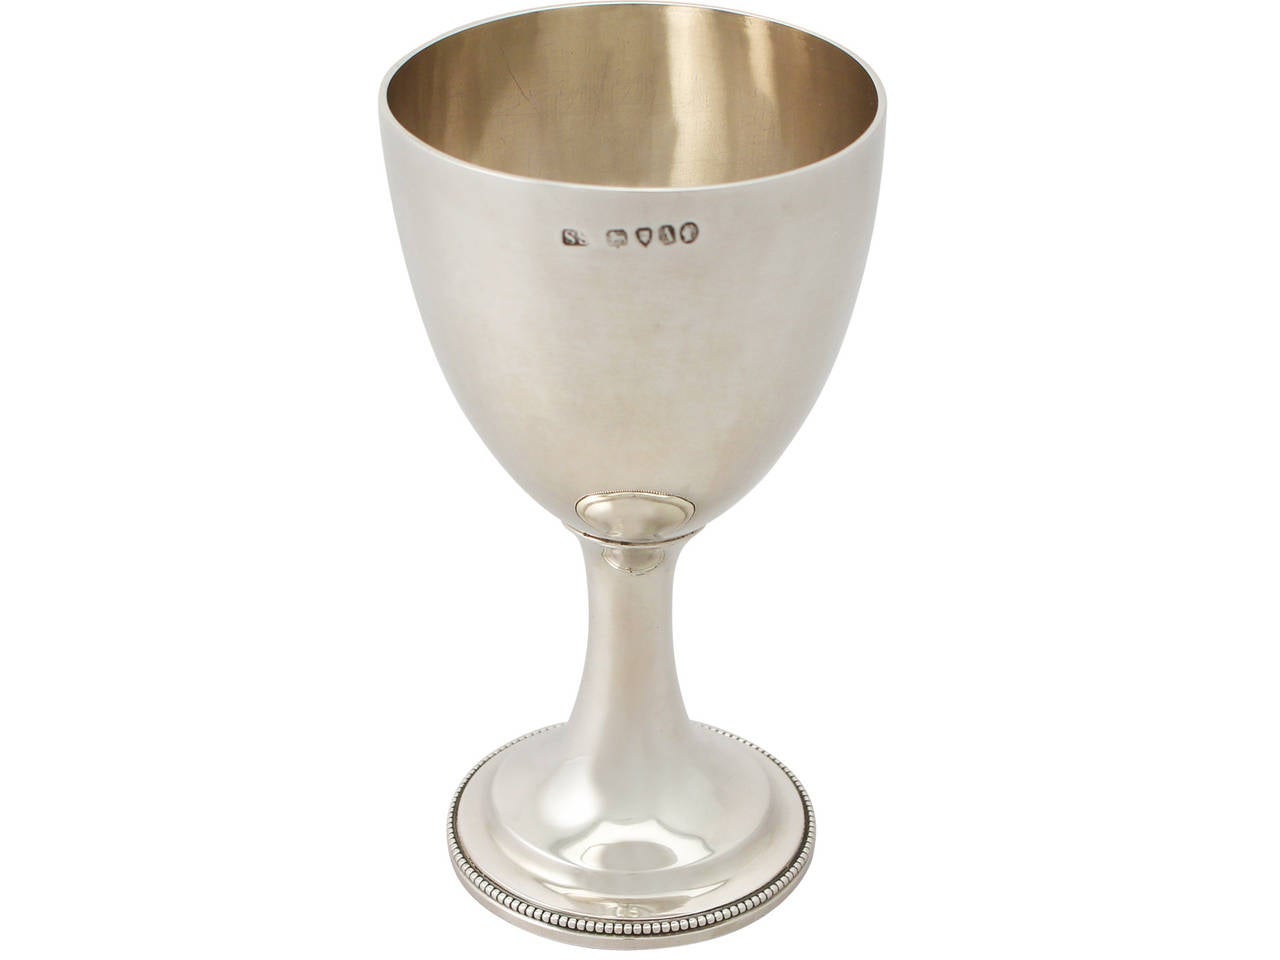 A fine and impressive antique Victorian English sterling silver goblet; an addition to our wine and drinks related silverware collection.
This fine antique Victorian English sterling silver goblet has a plain bell shaped form onto a circular